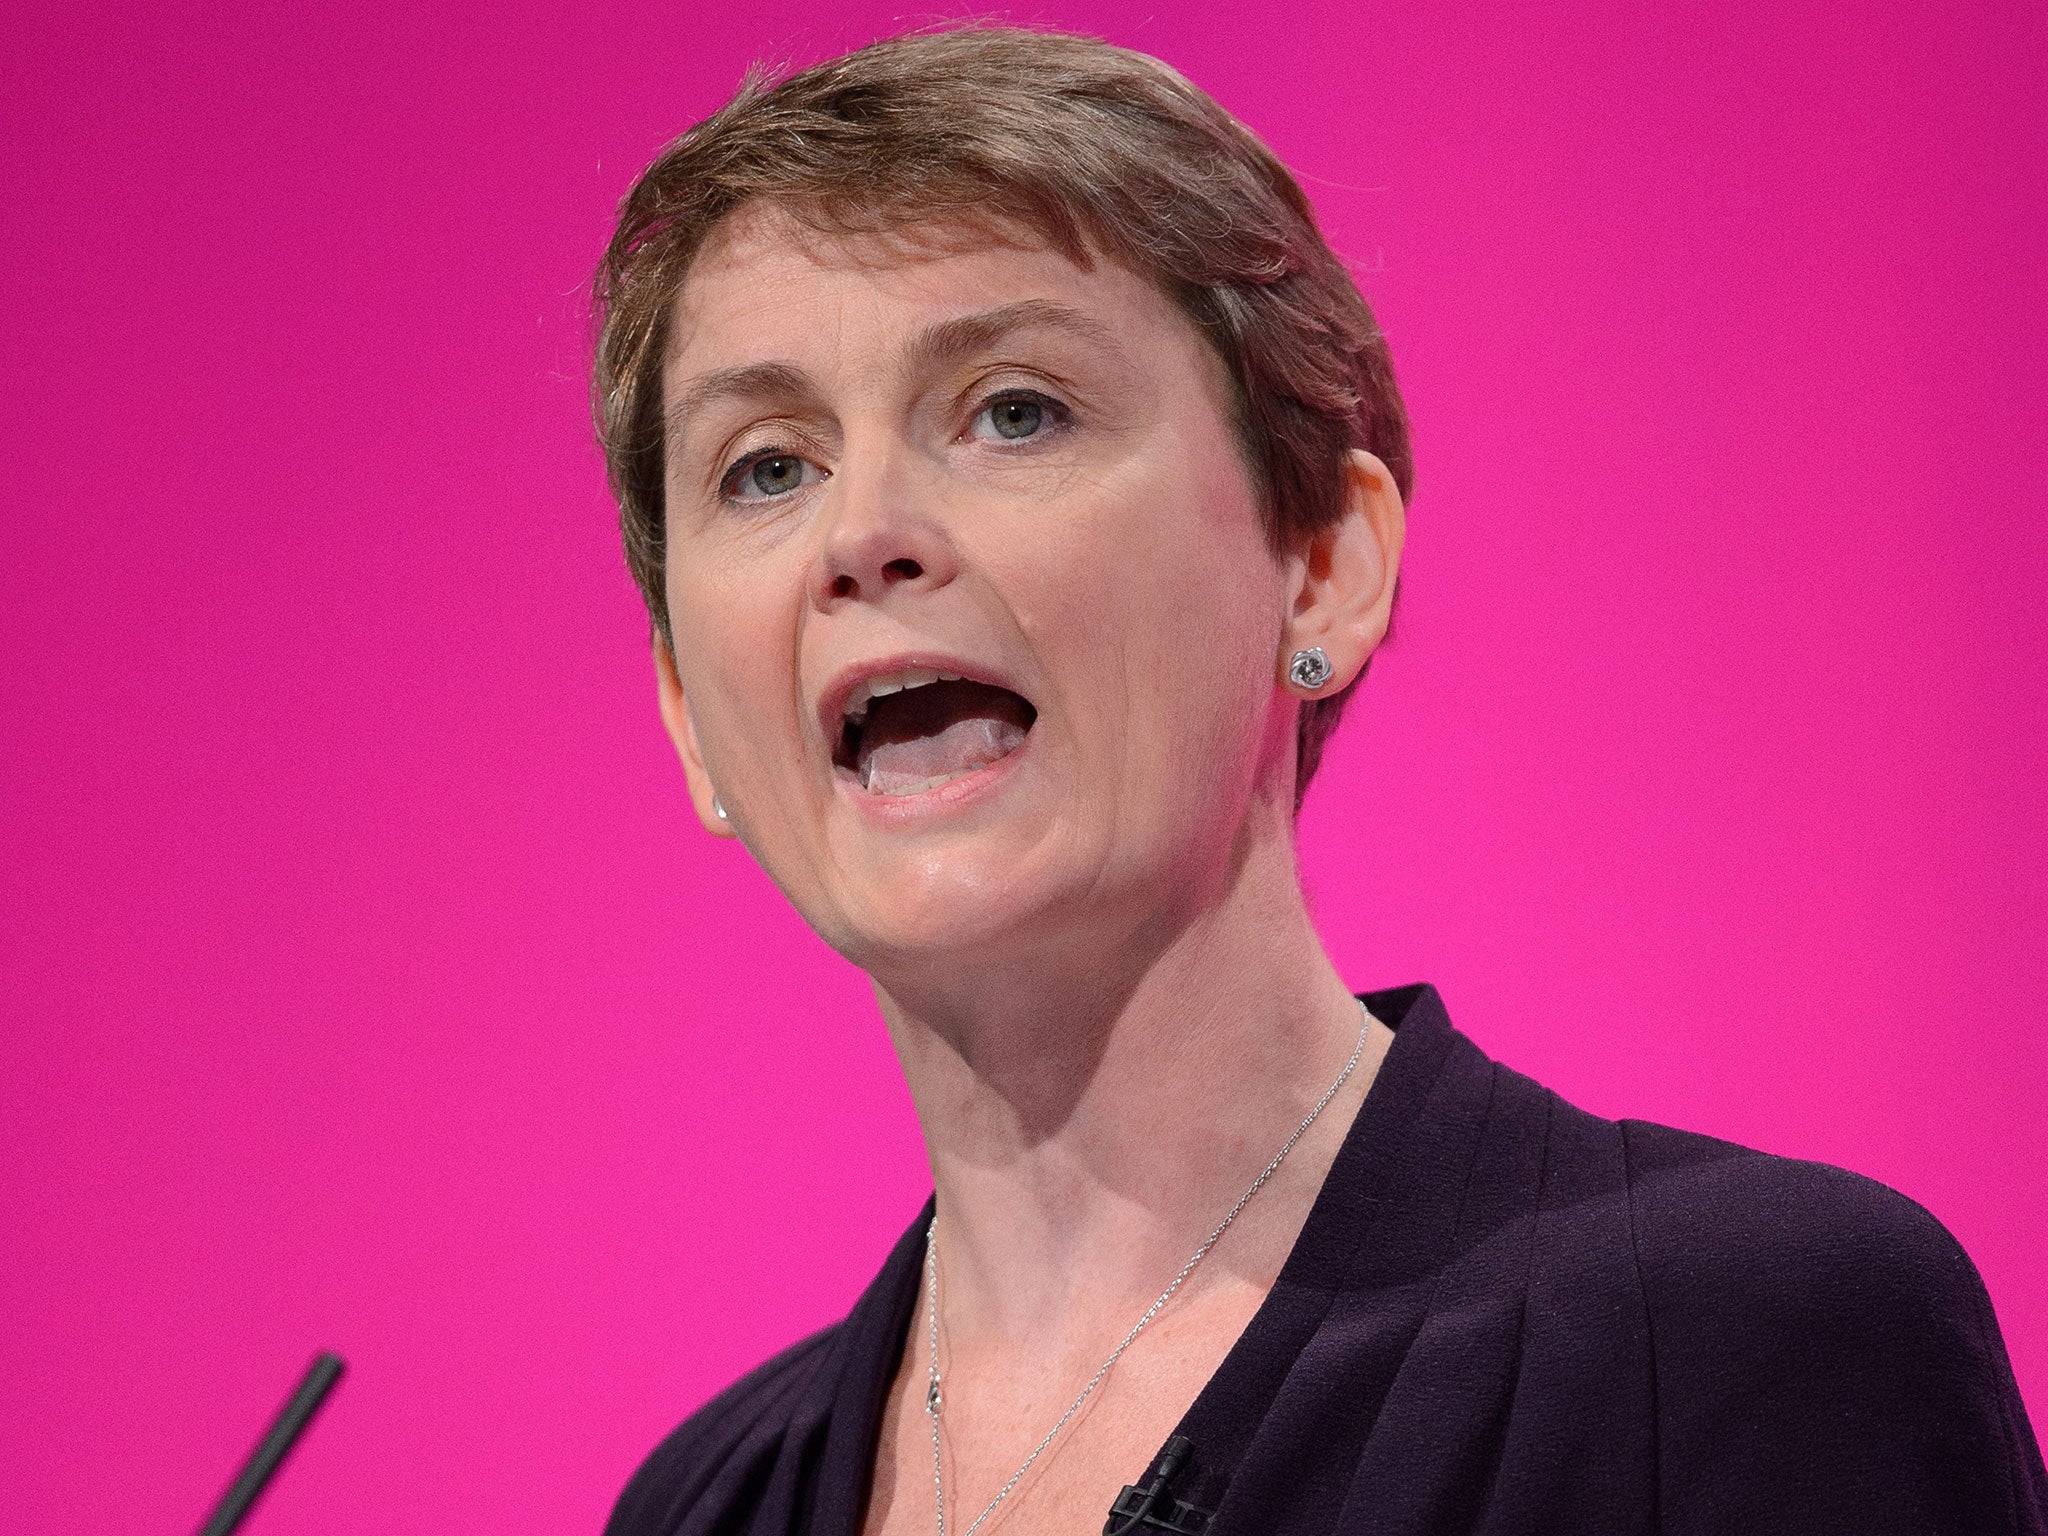 Yvette Cooper is expected to draw support from former allies of Gordon Brown